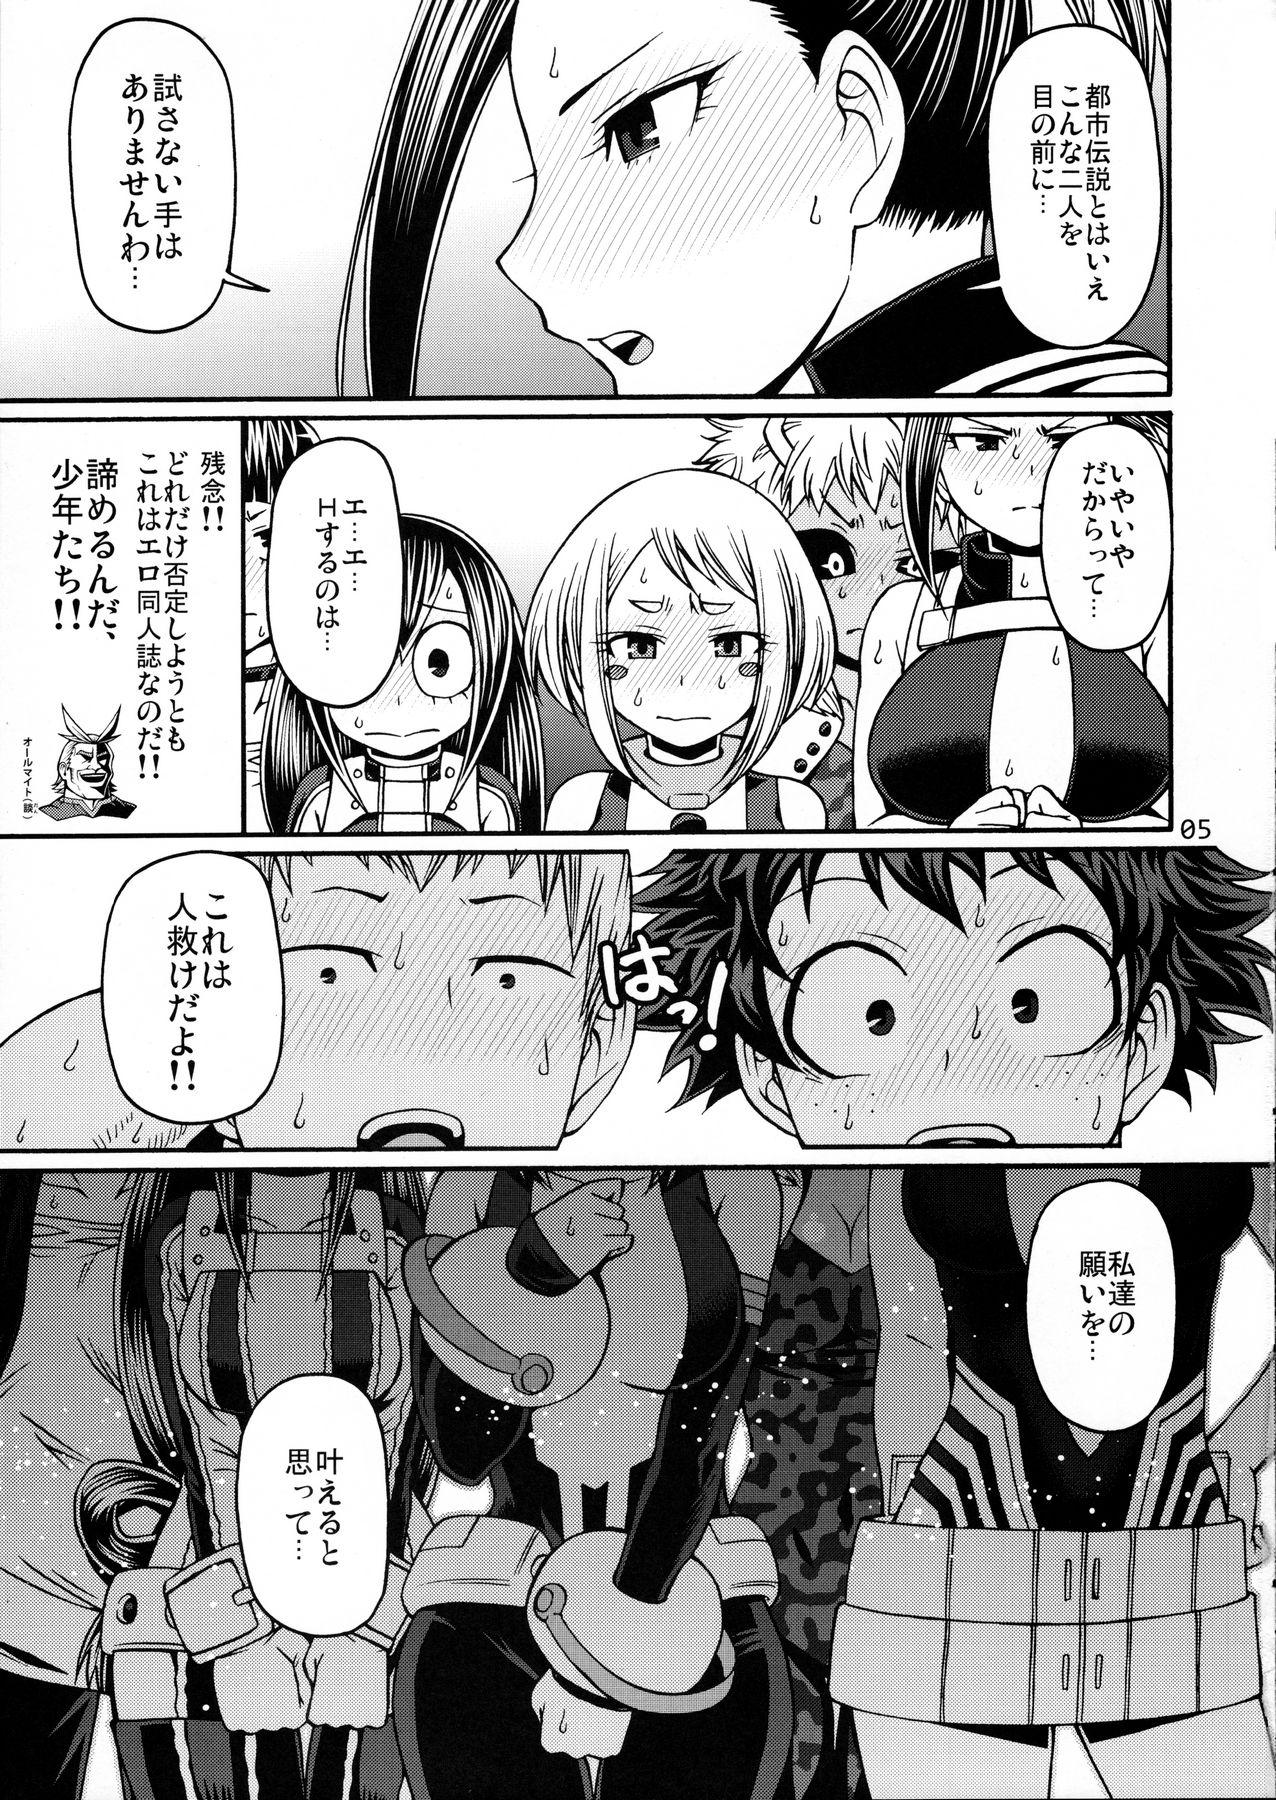 Punished POPPIN' GIRLS - My hero academia Outdoor Sex - Page 4